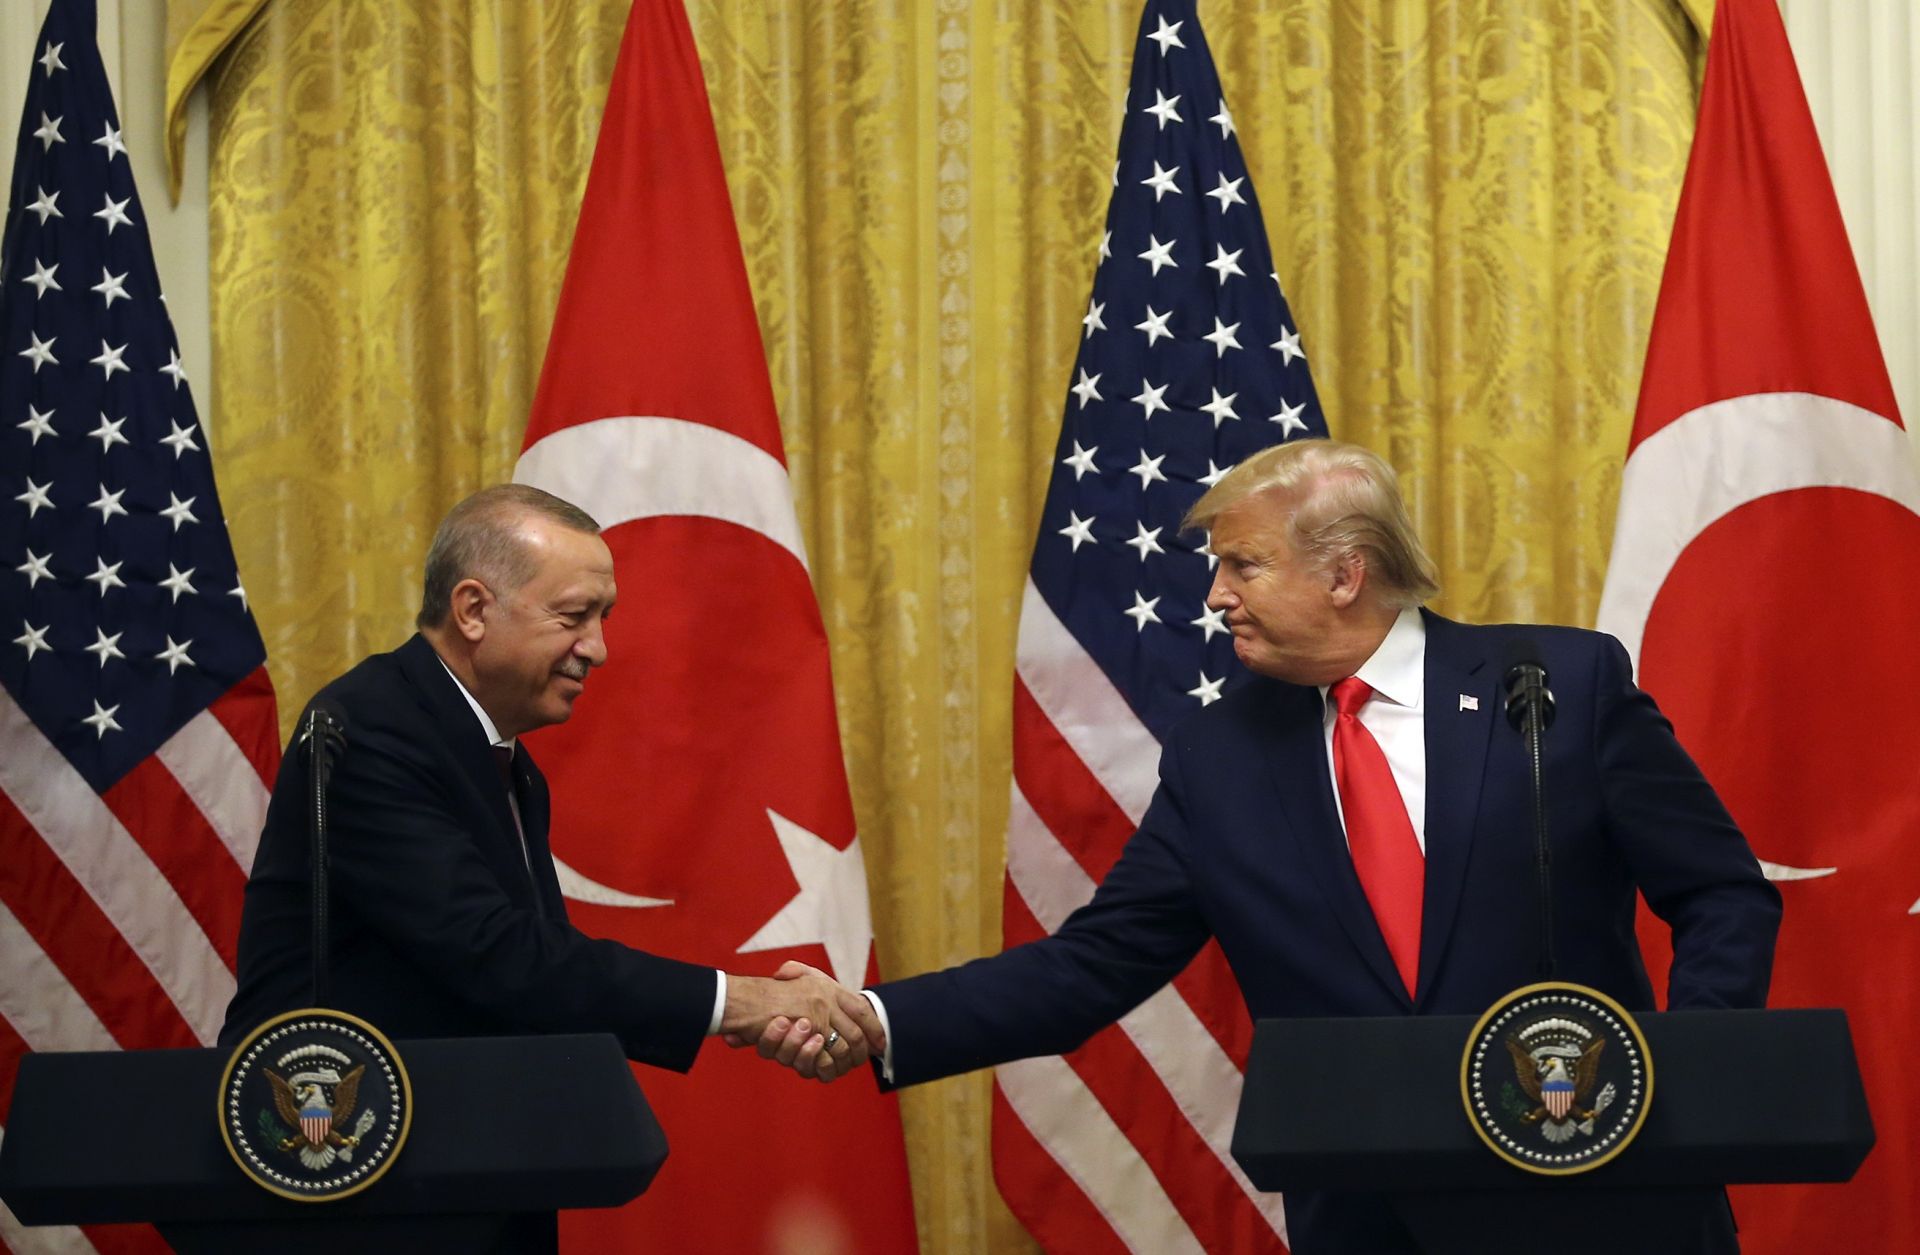 Turkish President Recep Tayyip Erdogan and U.S. President Donald Trump hold a news conference at the White House on Nov. 13, 2019.